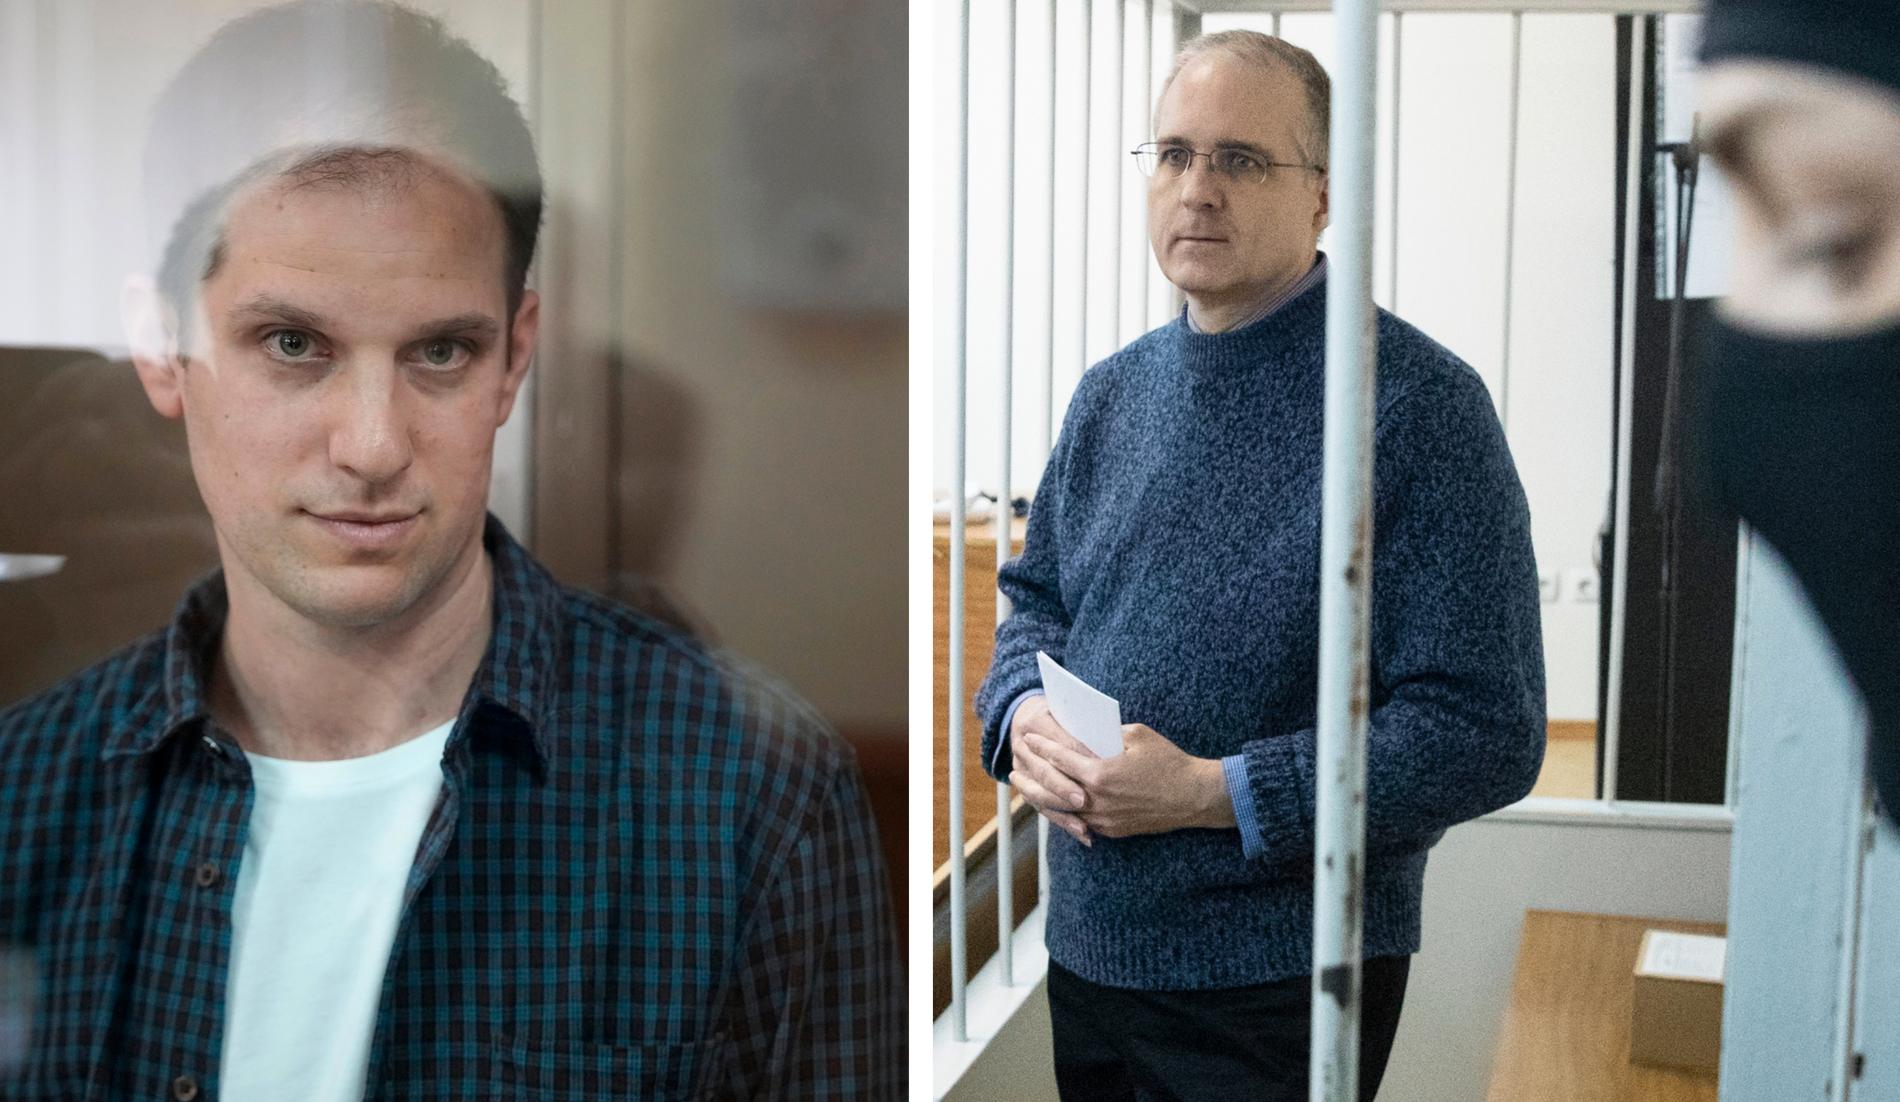 President Putin opens the door for the exchange of two Americans in Russian prisons.